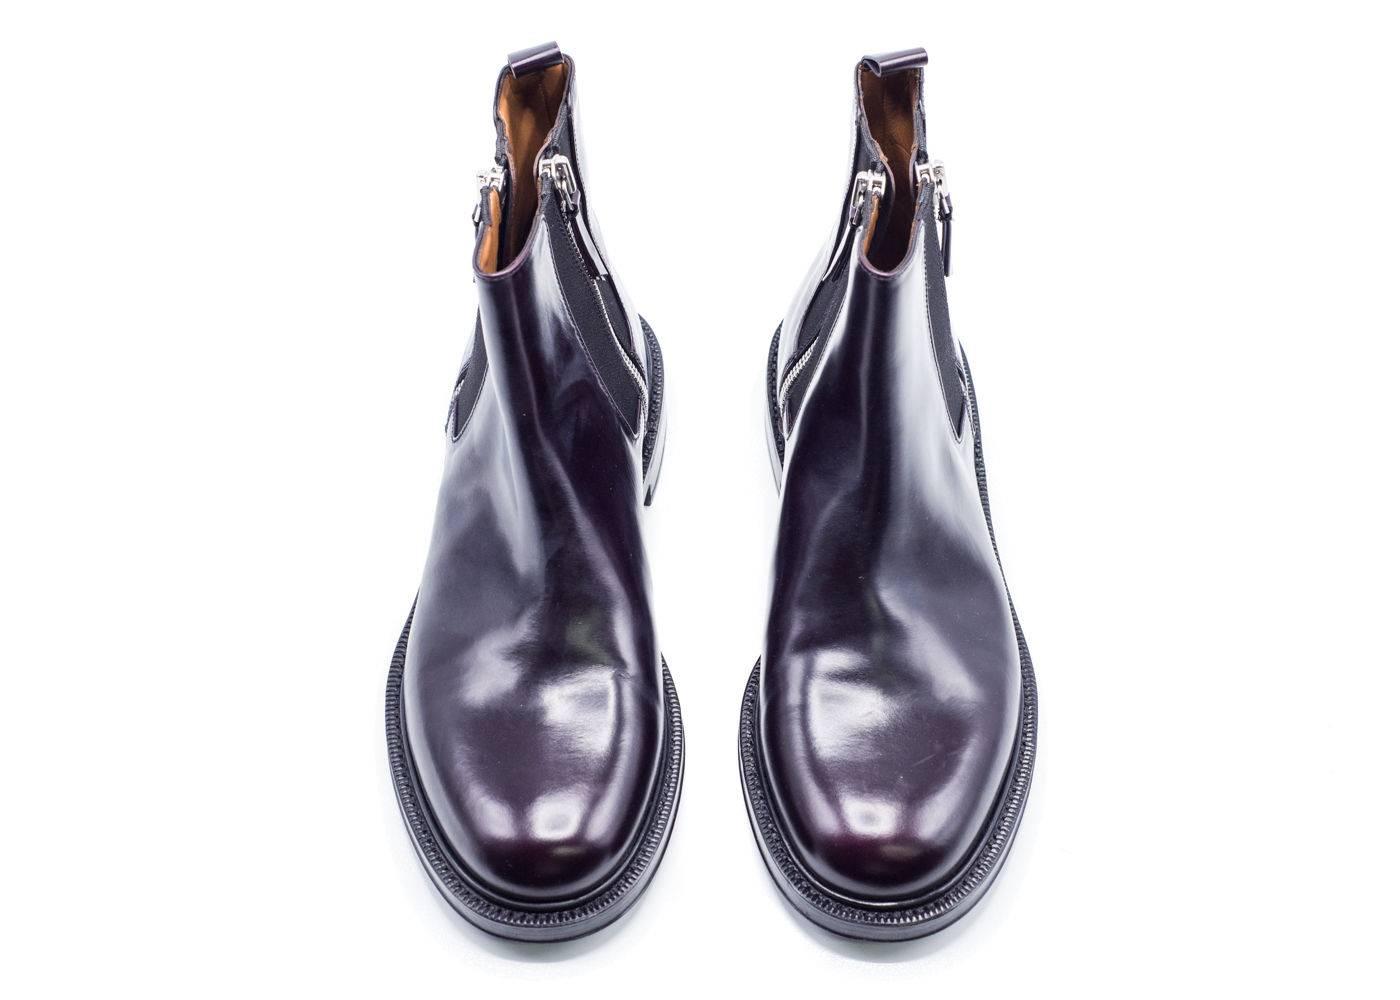 Classic ankle boot silhouette in a dark purple tone from fashion house Givenchy. Perfect for any outfit and any day yo up your fashion game and wardrobe. 

Composition: 100% Calfskin Leather
Leather Lining
Zip Fastening
Rounded Toe Line
Dark Purple